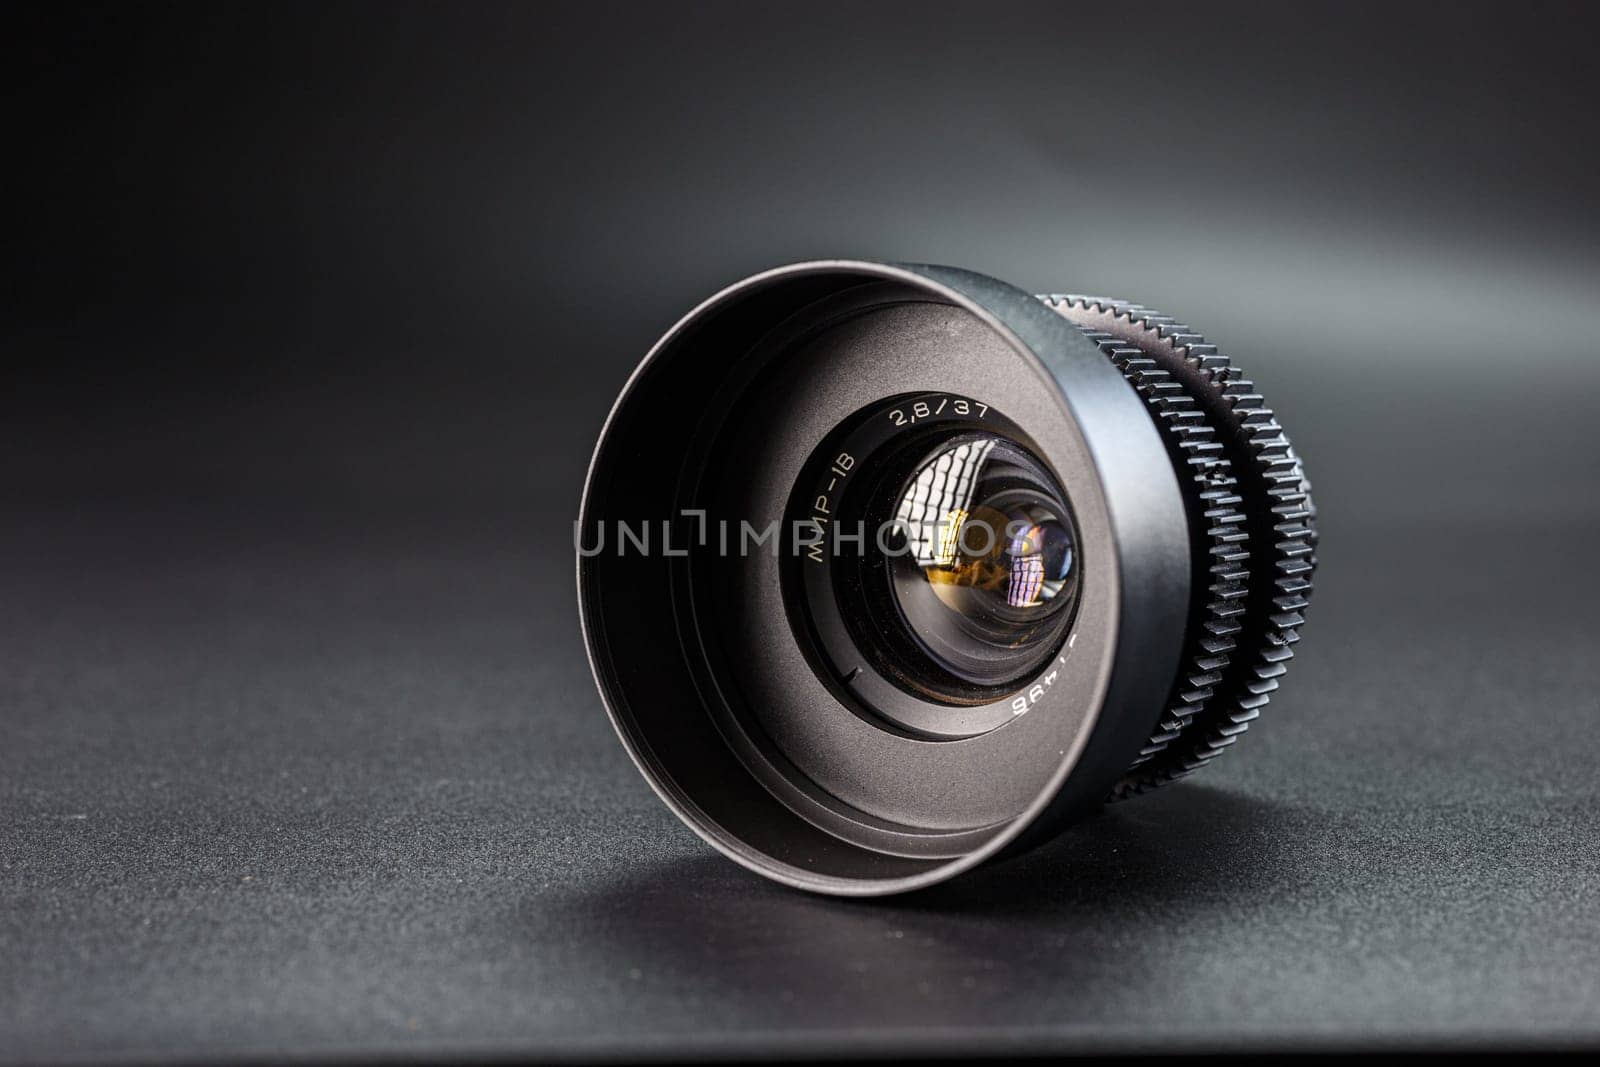 Slanted black camera lens capturing clear reflections, marked with 2.8 37 , premium photography equipment against a dark, soft-focus background by mosfet_ua